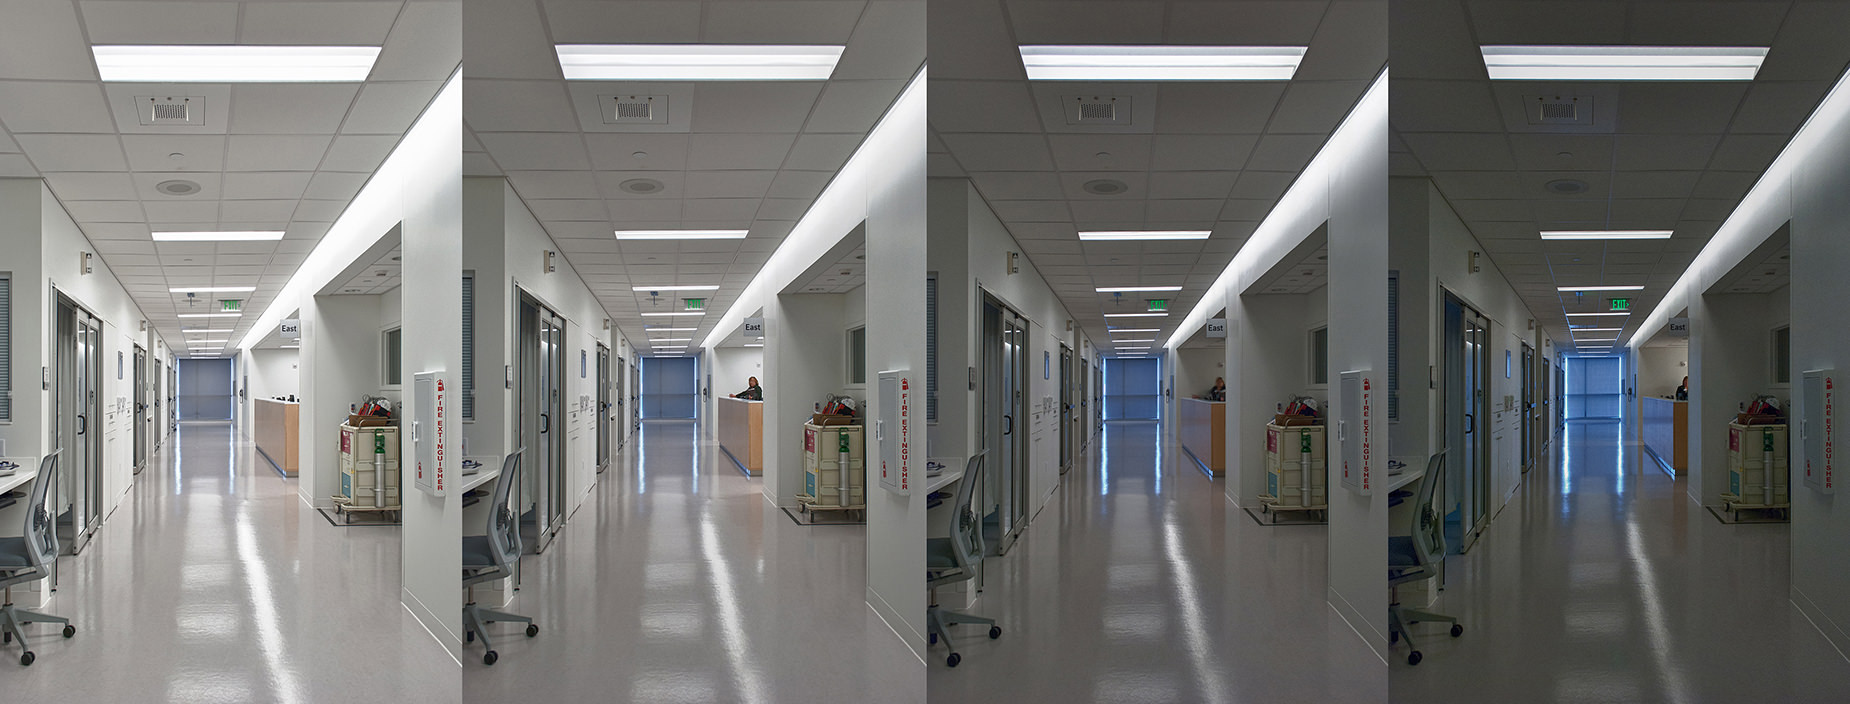 Fairview Hospital ICU lighting controls at different stages in the lighting cycle